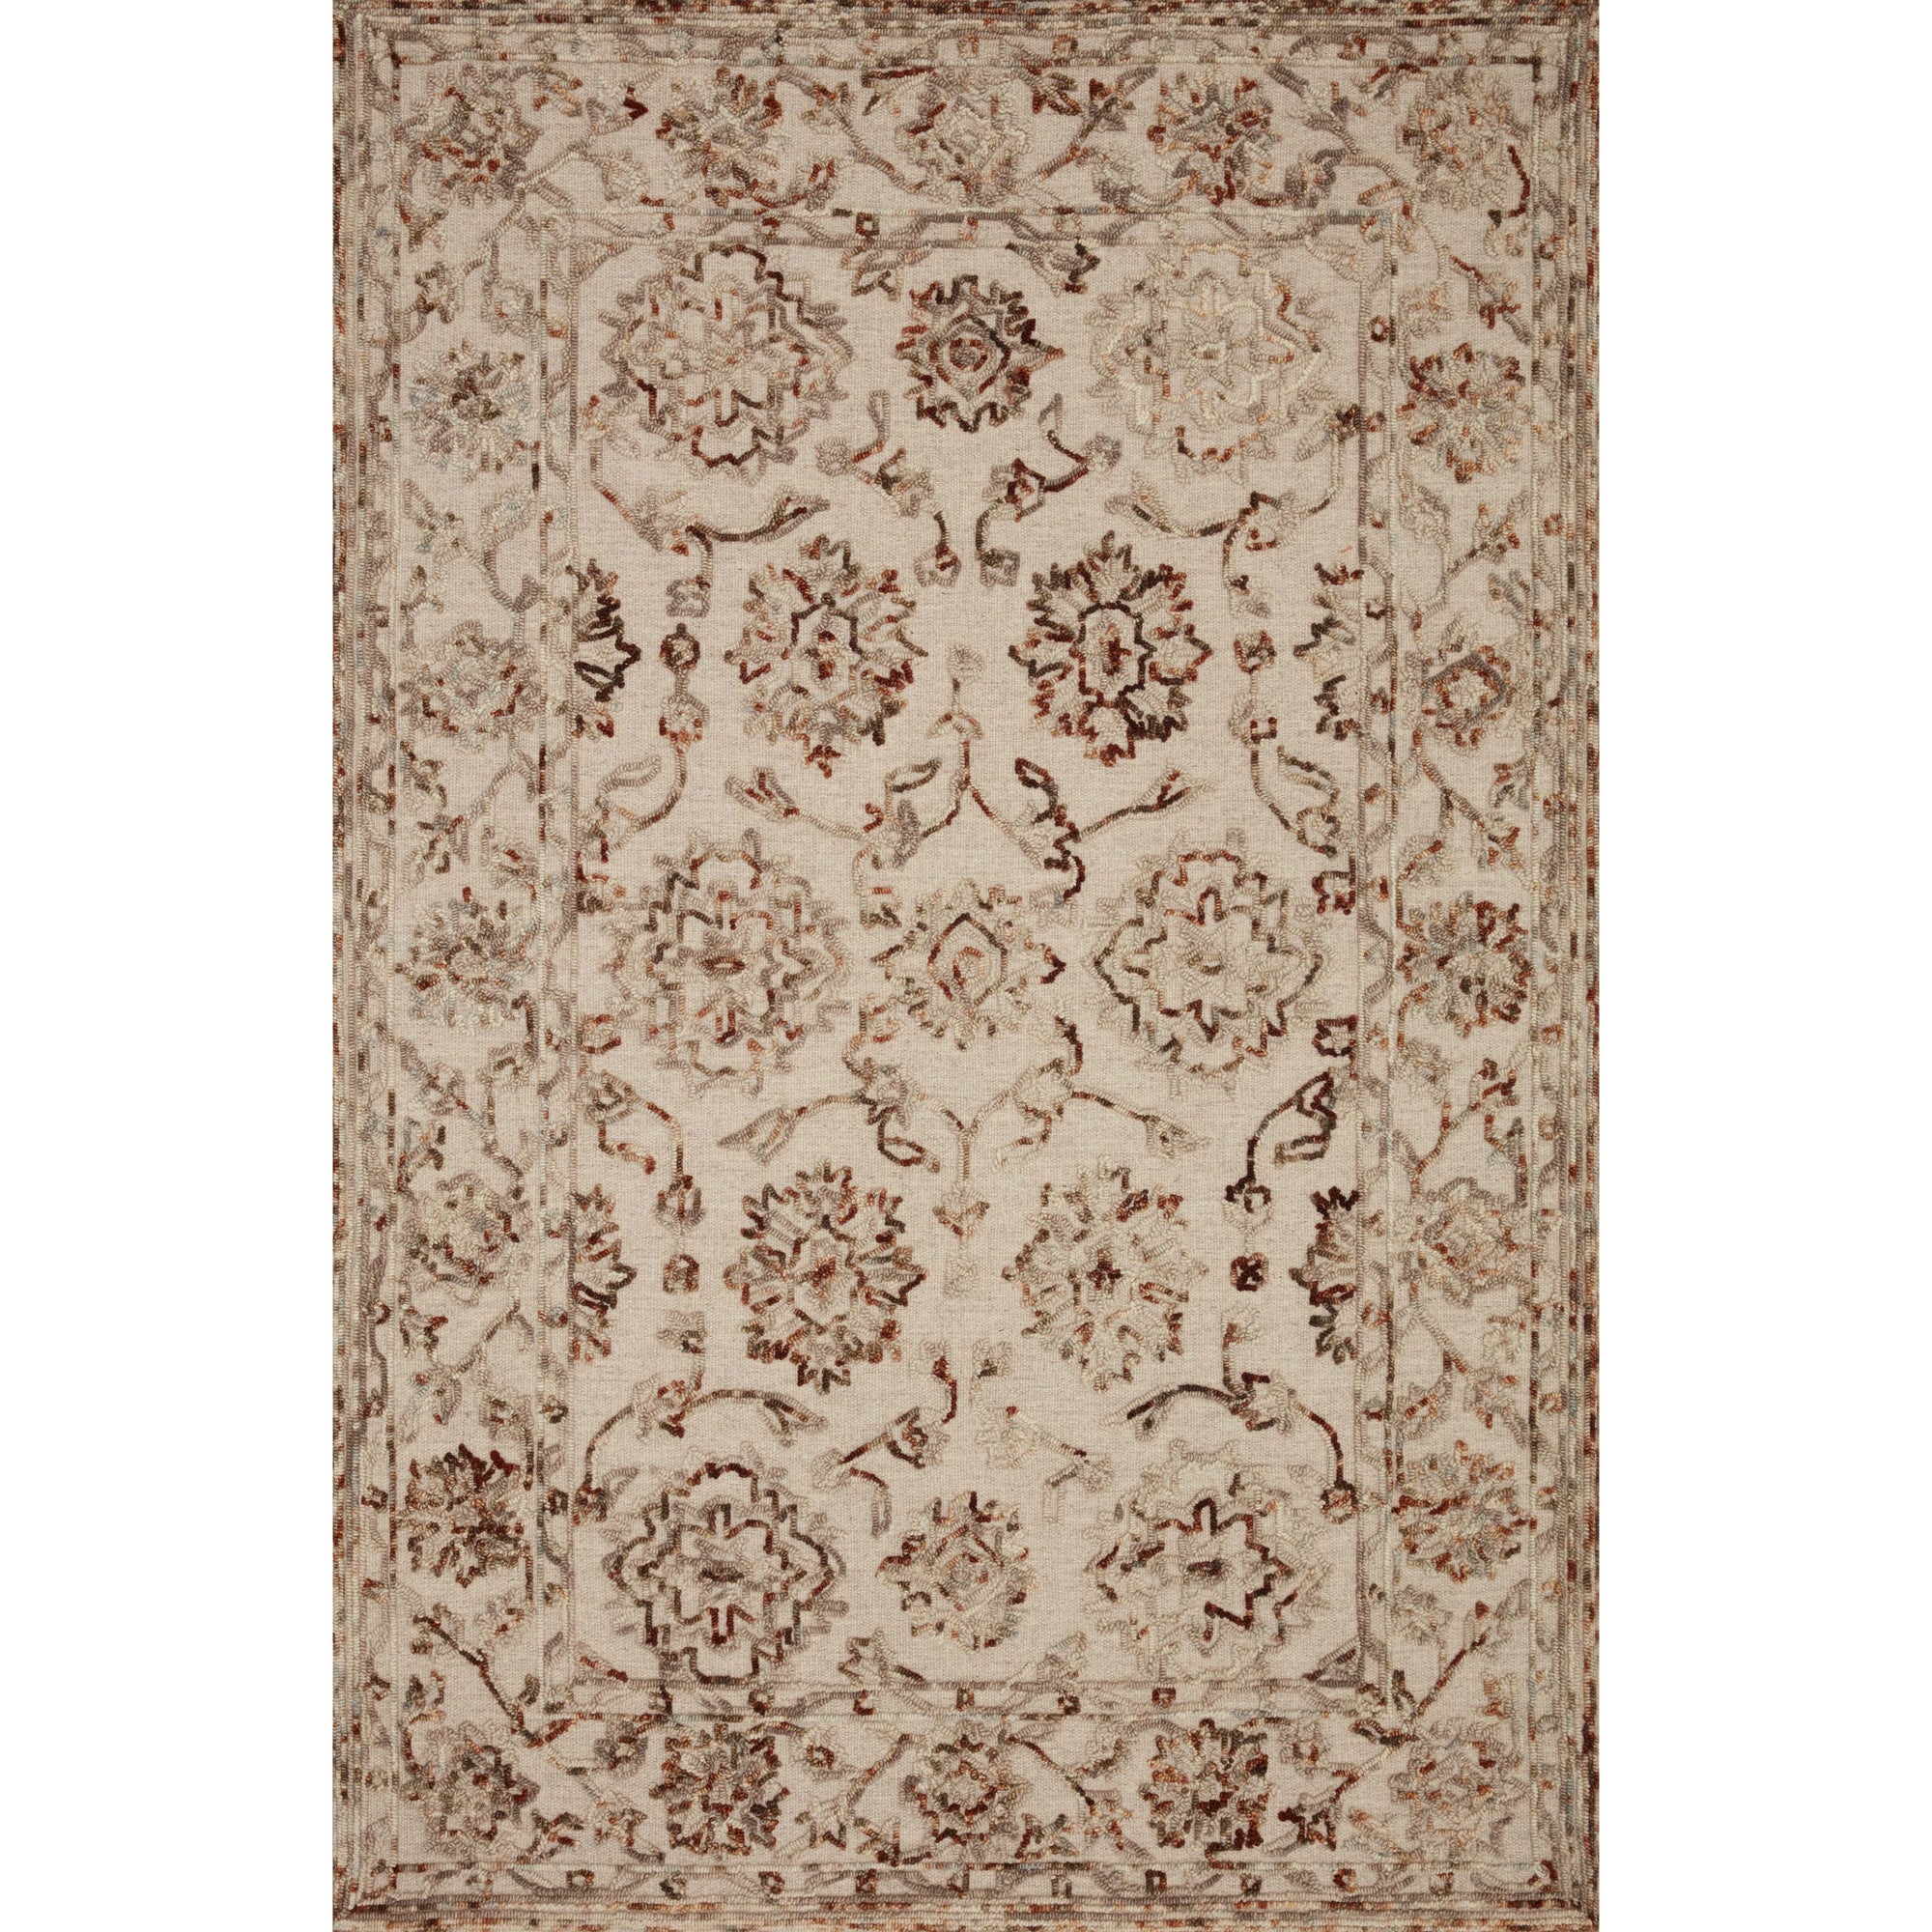 Rugs by Roo Loloi Halle Taupe Rust Area Rug in size 18" x 18" Sample